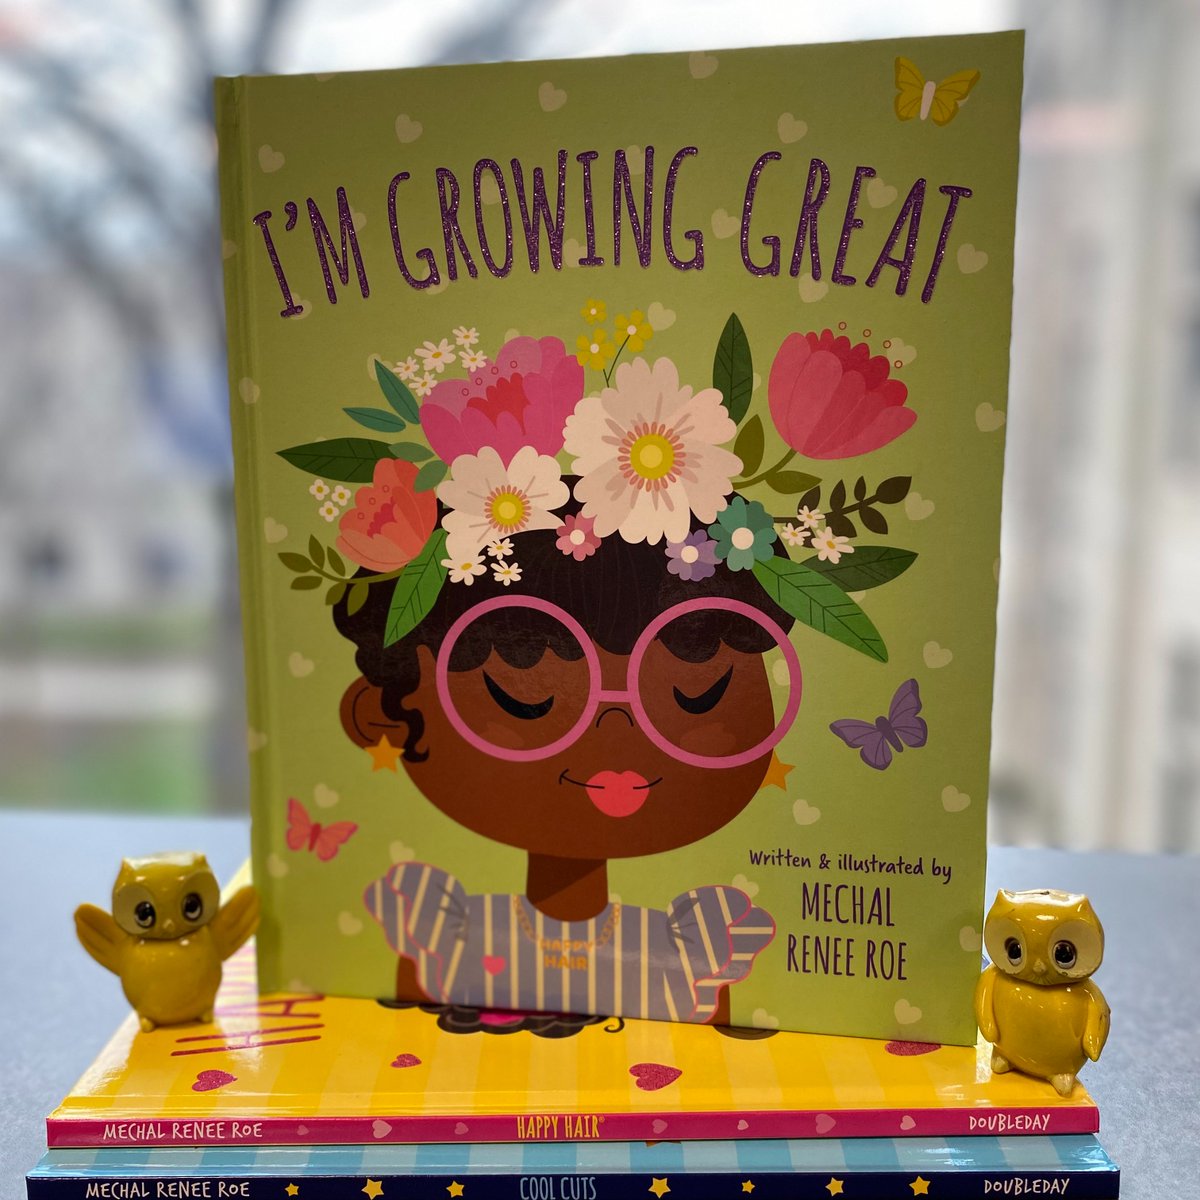 I'm Growing Great written and illustrated by Mechal Renee Roe. In this magically illustrated book, empowered black and brown girls are celebrated in wonderous nature in springtime. A perfect read-aloud! #midweekmorris #imgrowinggreat @HappyHairGirls @doubledaybooks